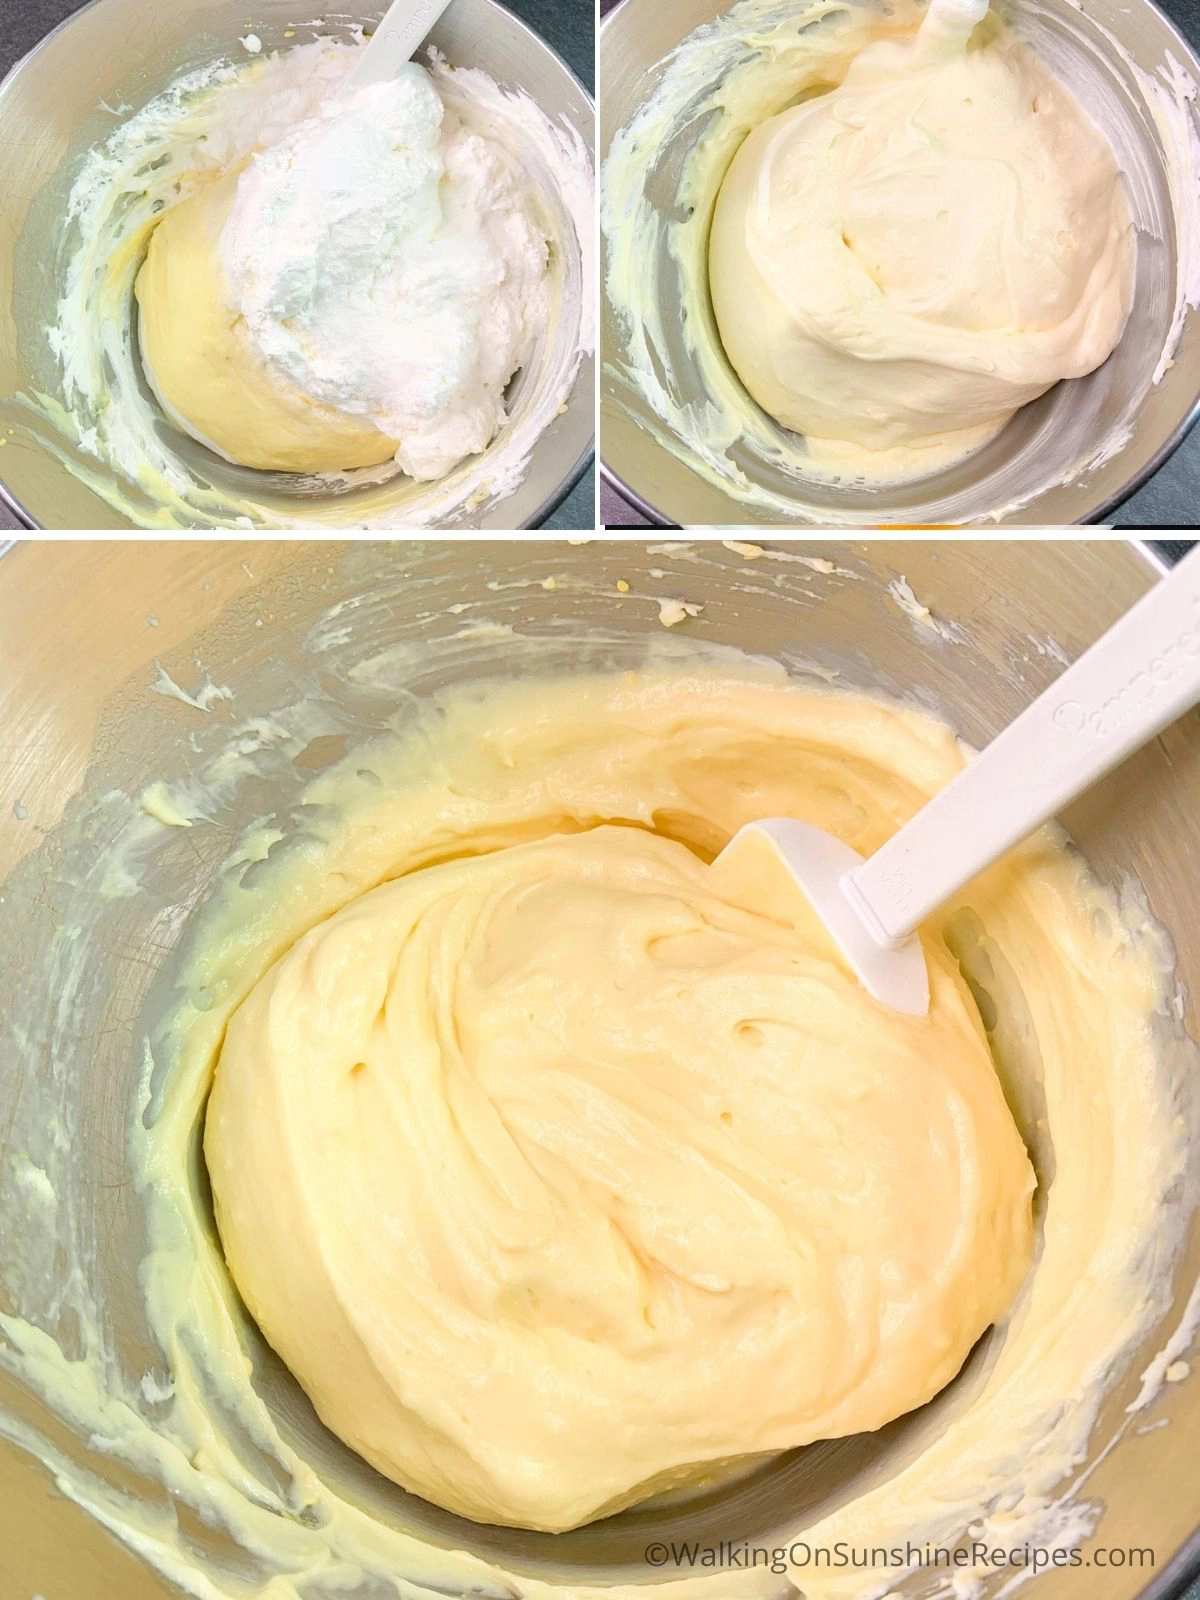 Add Cool Whip to pudding mixture.